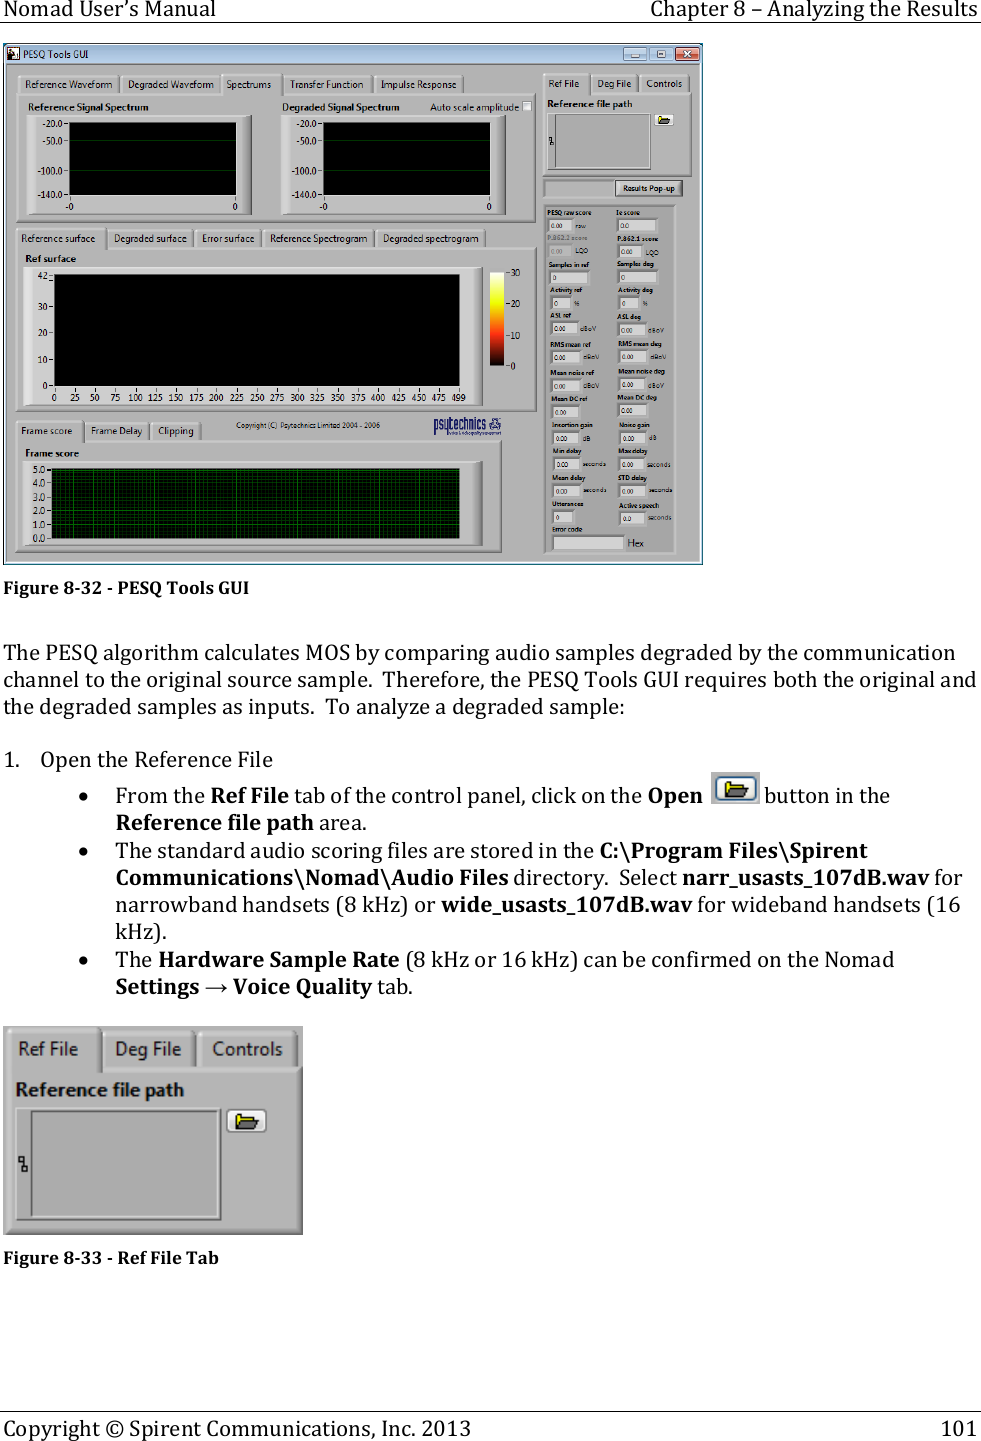  Nomad User’s Manual  Chapter 8 – Analyzing the Results Copyright © Spirent Communications, Inc. 2013    101   Figure 8-32 - PESQ Tools GUI  The PESQ algorithm calculates MOS by comparing audio samples degraded by the communication channel to the original source sample.  Therefore, the PESQ Tools GUI requires both the original and the degraded samples as inputs.  To analyze a degraded sample:  1. Open the Reference File  From the Ref File tab of the control panel, click on the Open   button in the Reference file path area.  The standard audio scoring files are stored in the C:\Program Files\Spirent Communications\Nomad\Audio Files directory.  Select narr_usasts_107dB.wav for narrowband handsets (8 kHz) or wide_usasts_107dB.wav for wideband handsets (16 kHz).   The Hardware Sample Rate (8 kHz or 16 kHz) can be confirmed on the Nomad Settings → Voice Quality tab.   Figure 8-33 - Ref File Tab     